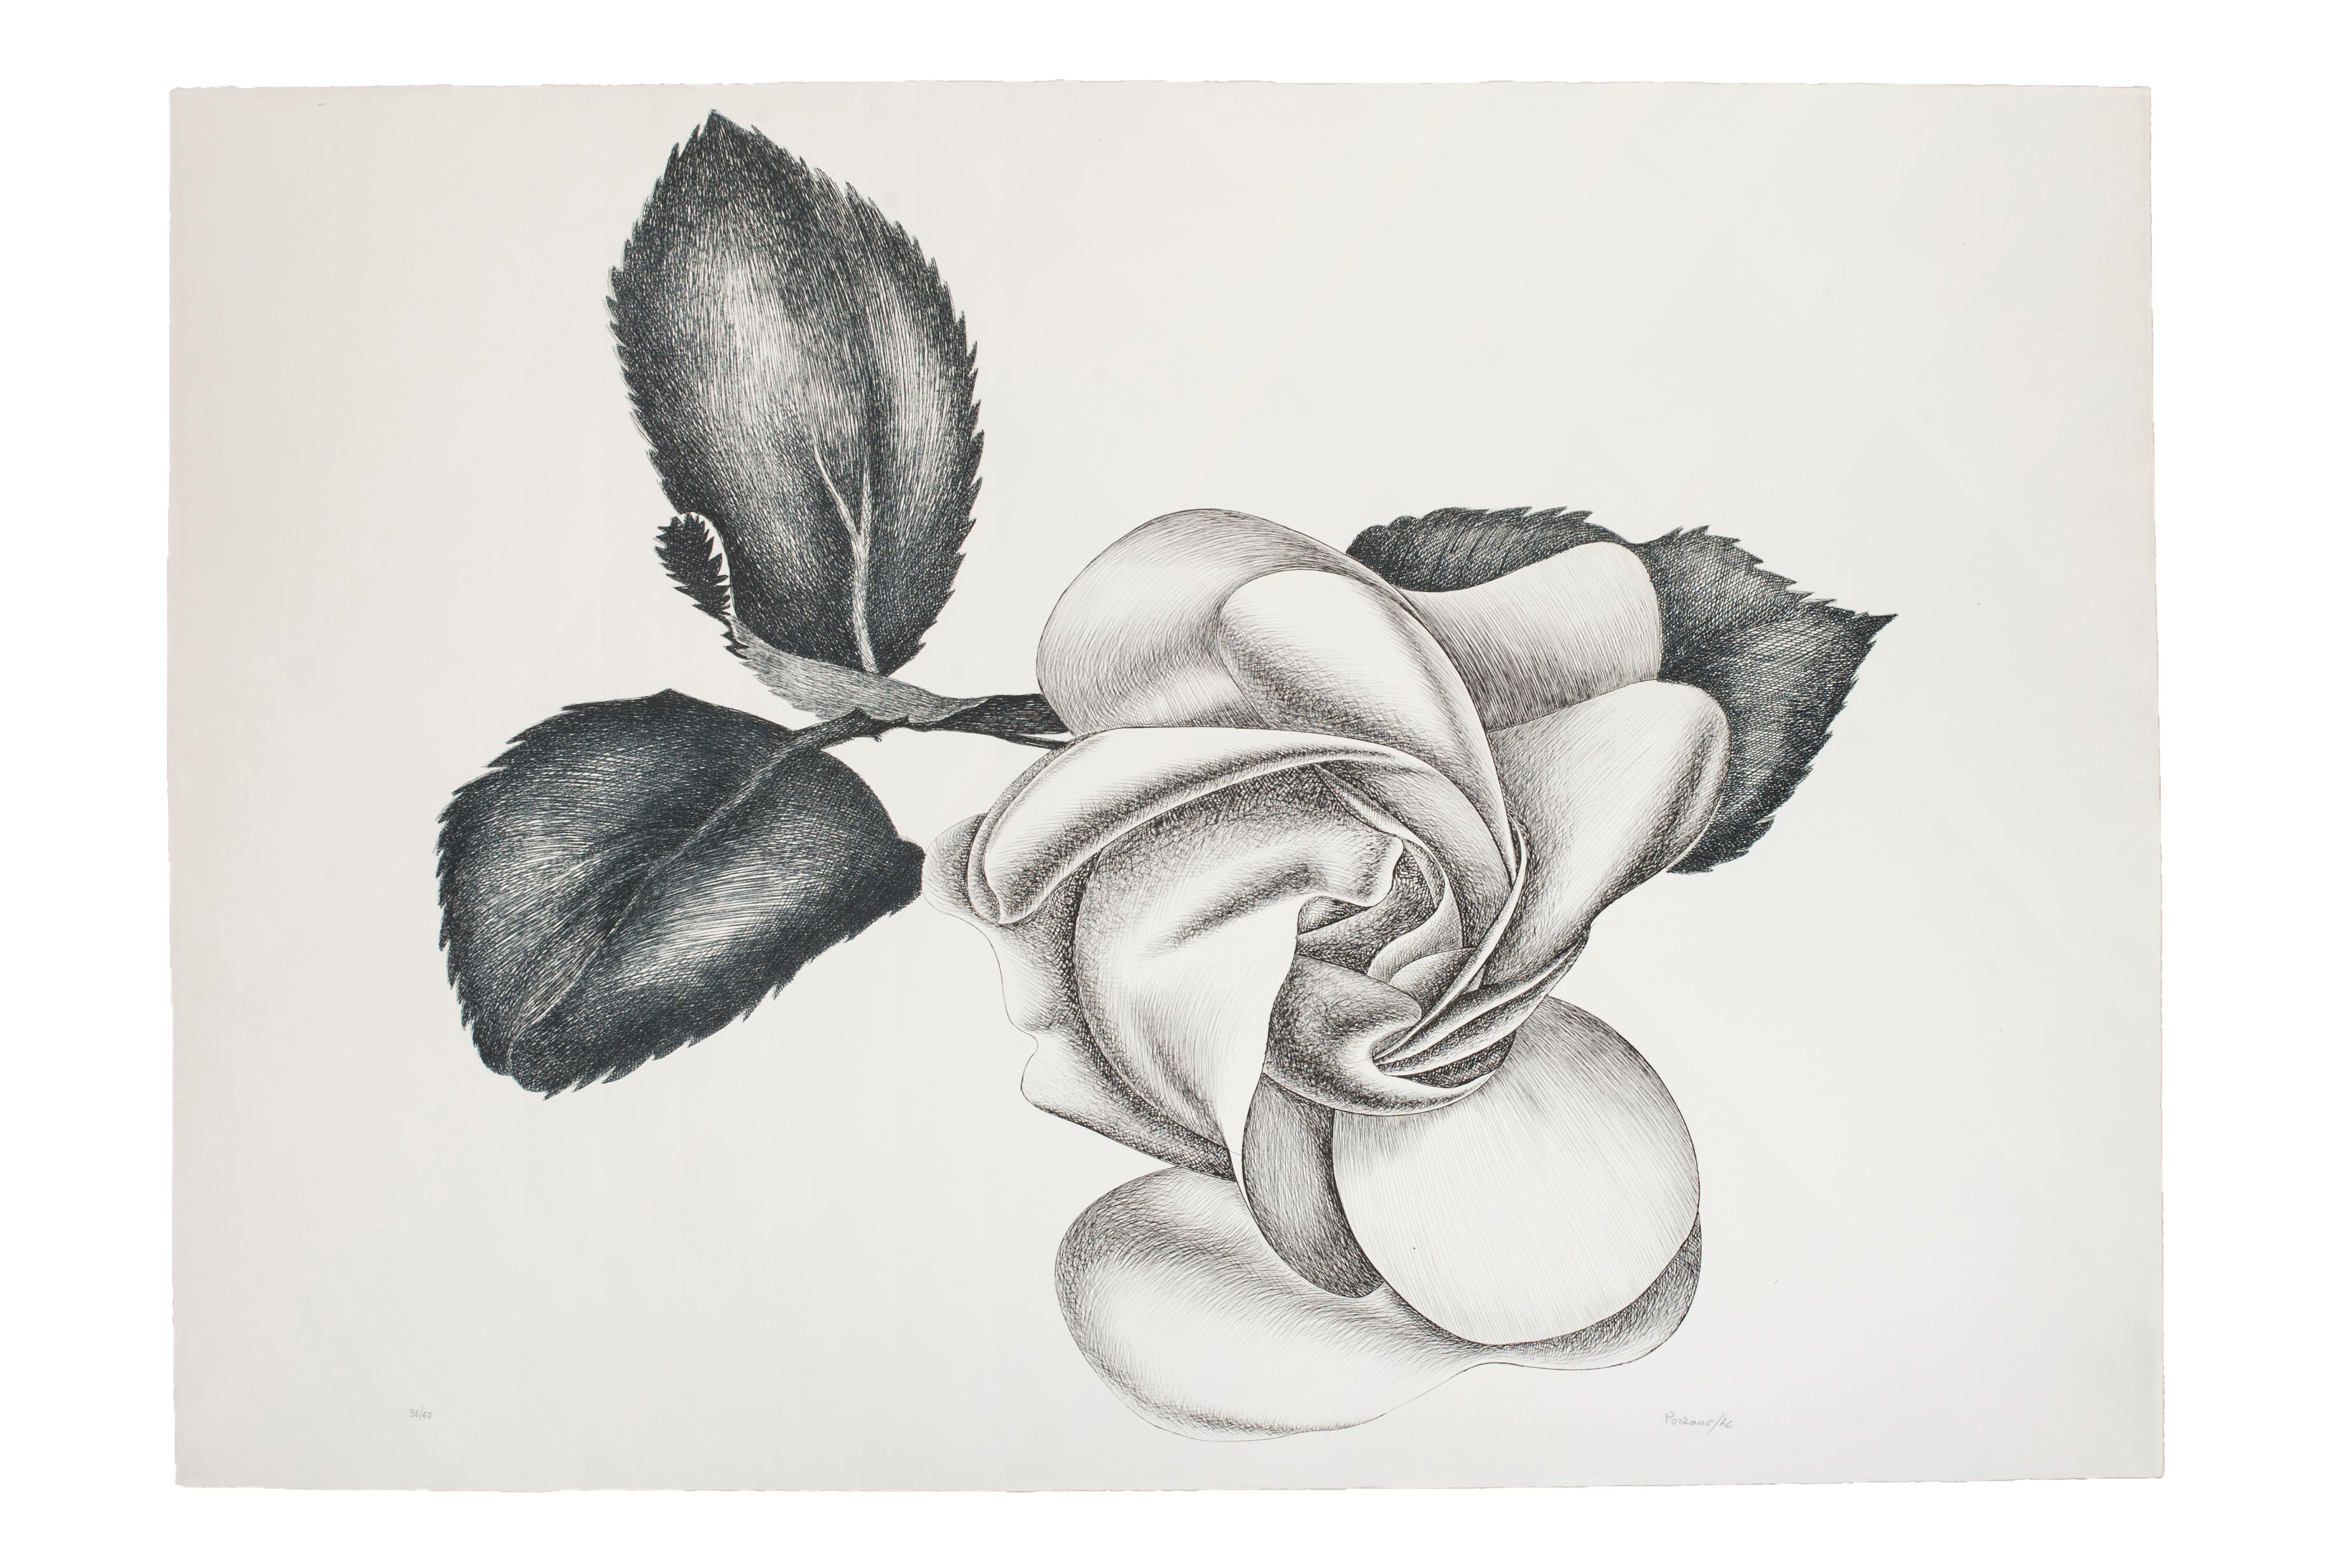 Black Rose is a beautiful original black and white etching on paper, realized by the Italian artist Giacomo Porzano (1925-2006).

Hand-signed, dated and numbered in Arabic numerals by the artist in pencil on lower margin.

Edition of 50 prints